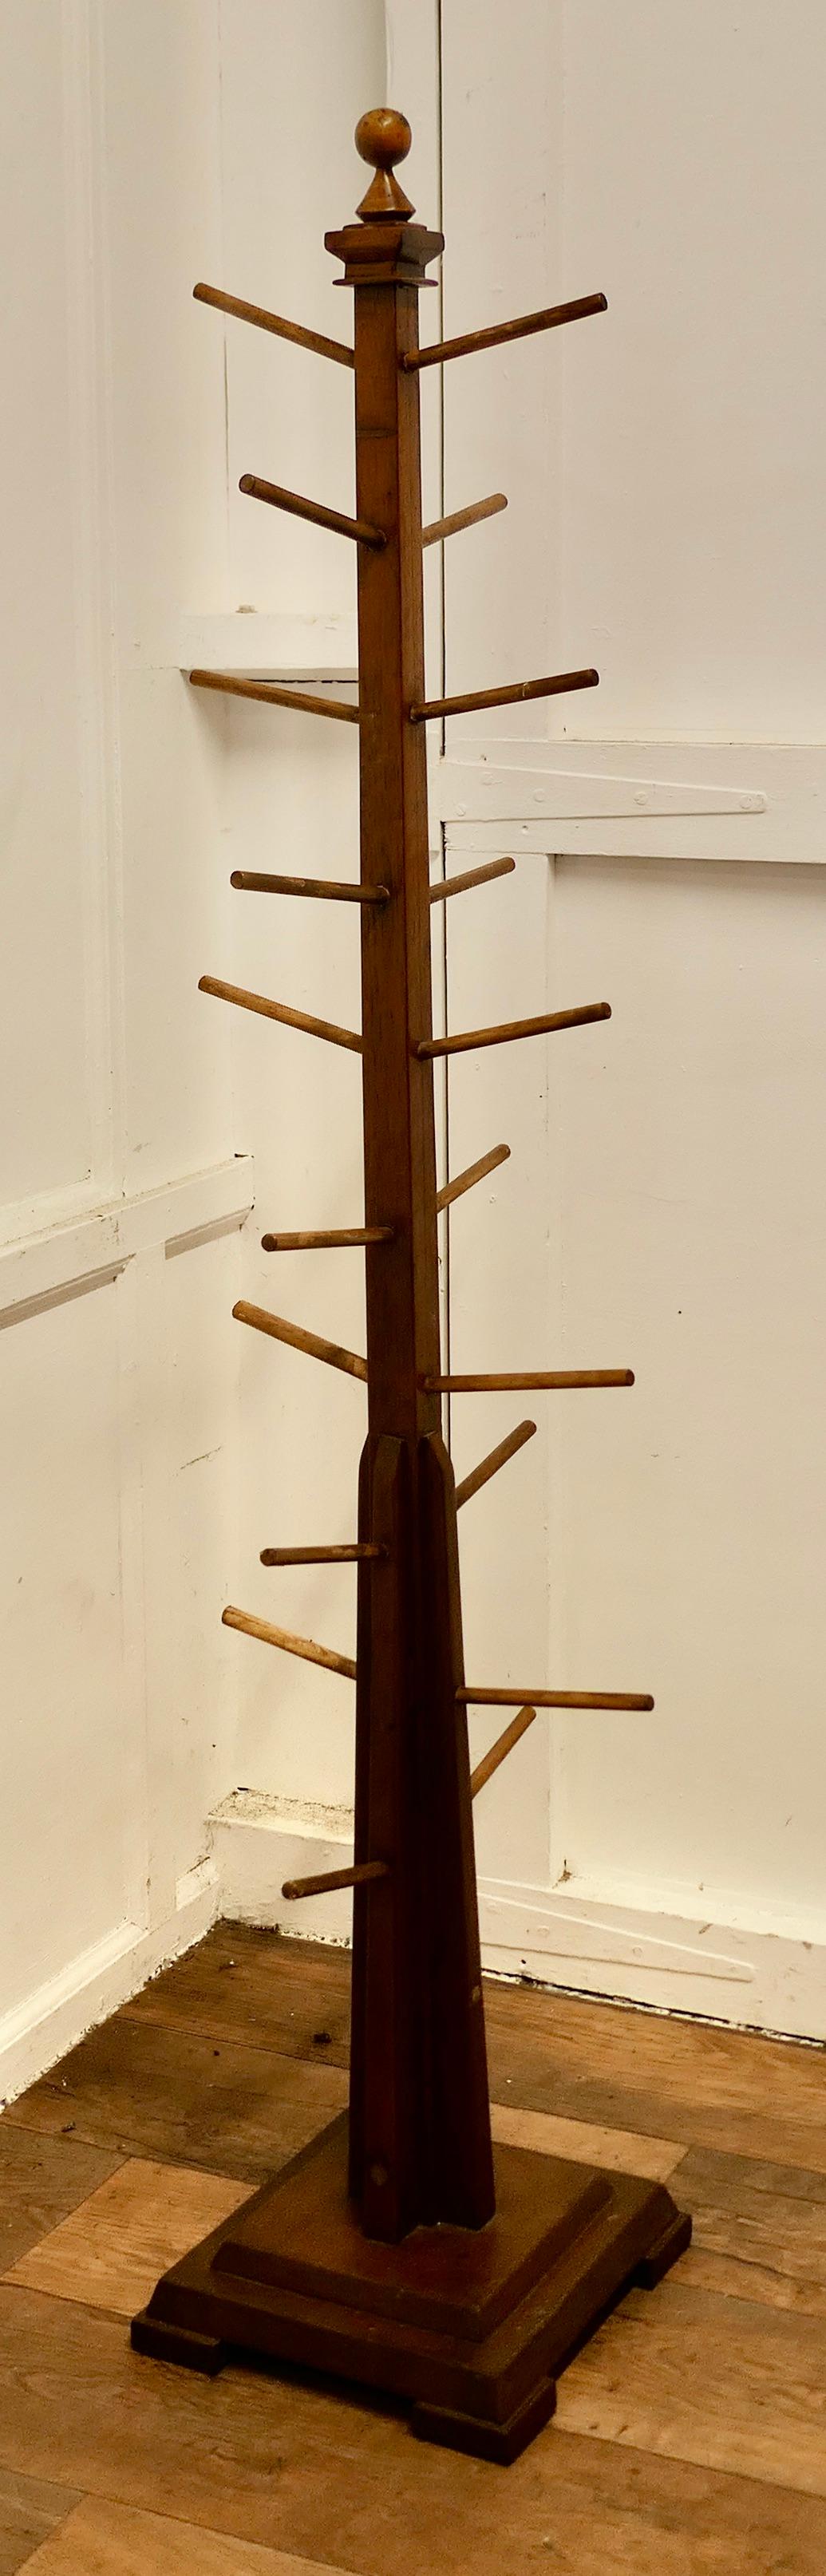 French Art Deco Golden Oak Window Display Stand

An Odeon style piece set on a stepped base and made in Golden Oak with 20 pegs to hang and display, the arms are set at a slight angle from the central column 
The Stand is 63” tall and 13”